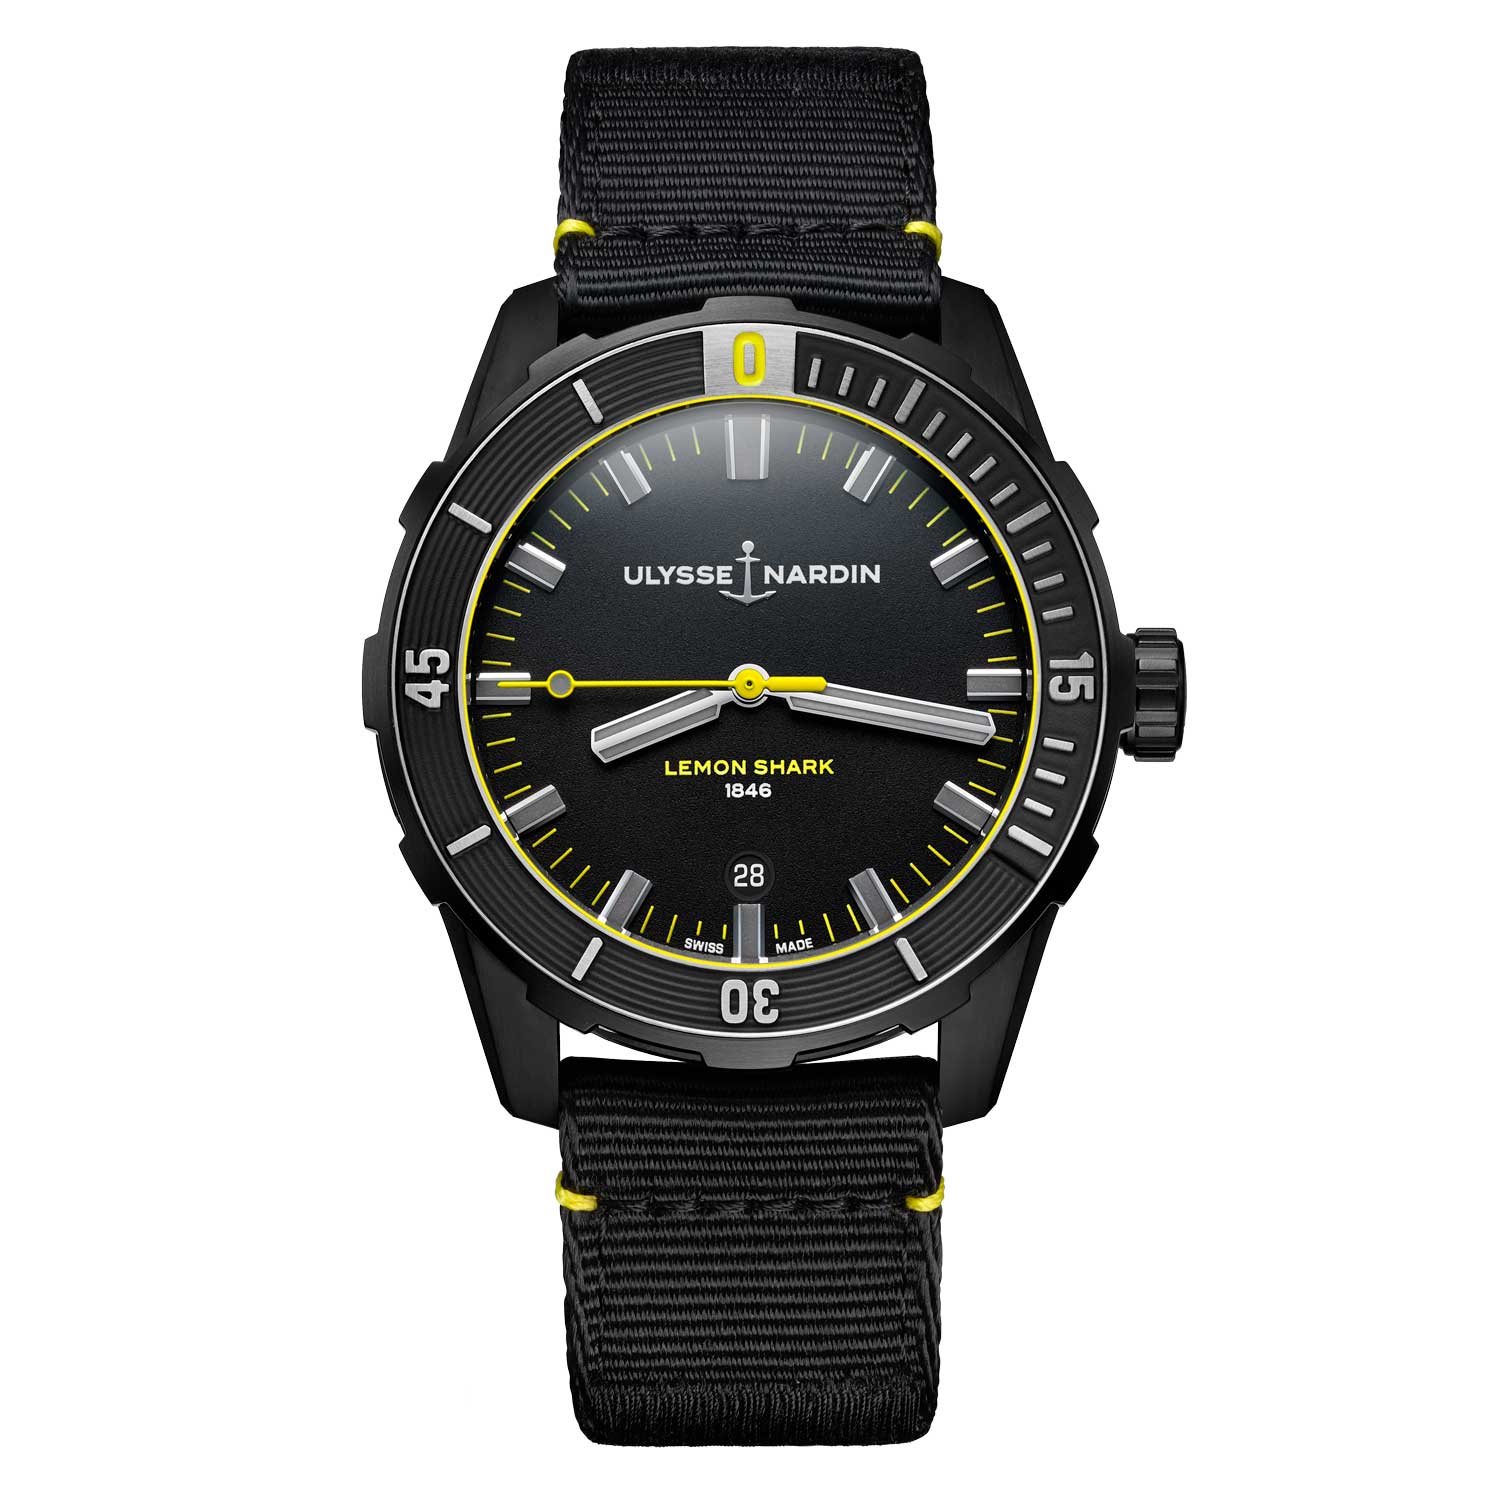 With water resistance to 300 meters, this sleek black DLC diver features a yellow lemon shark stamp on the dial.